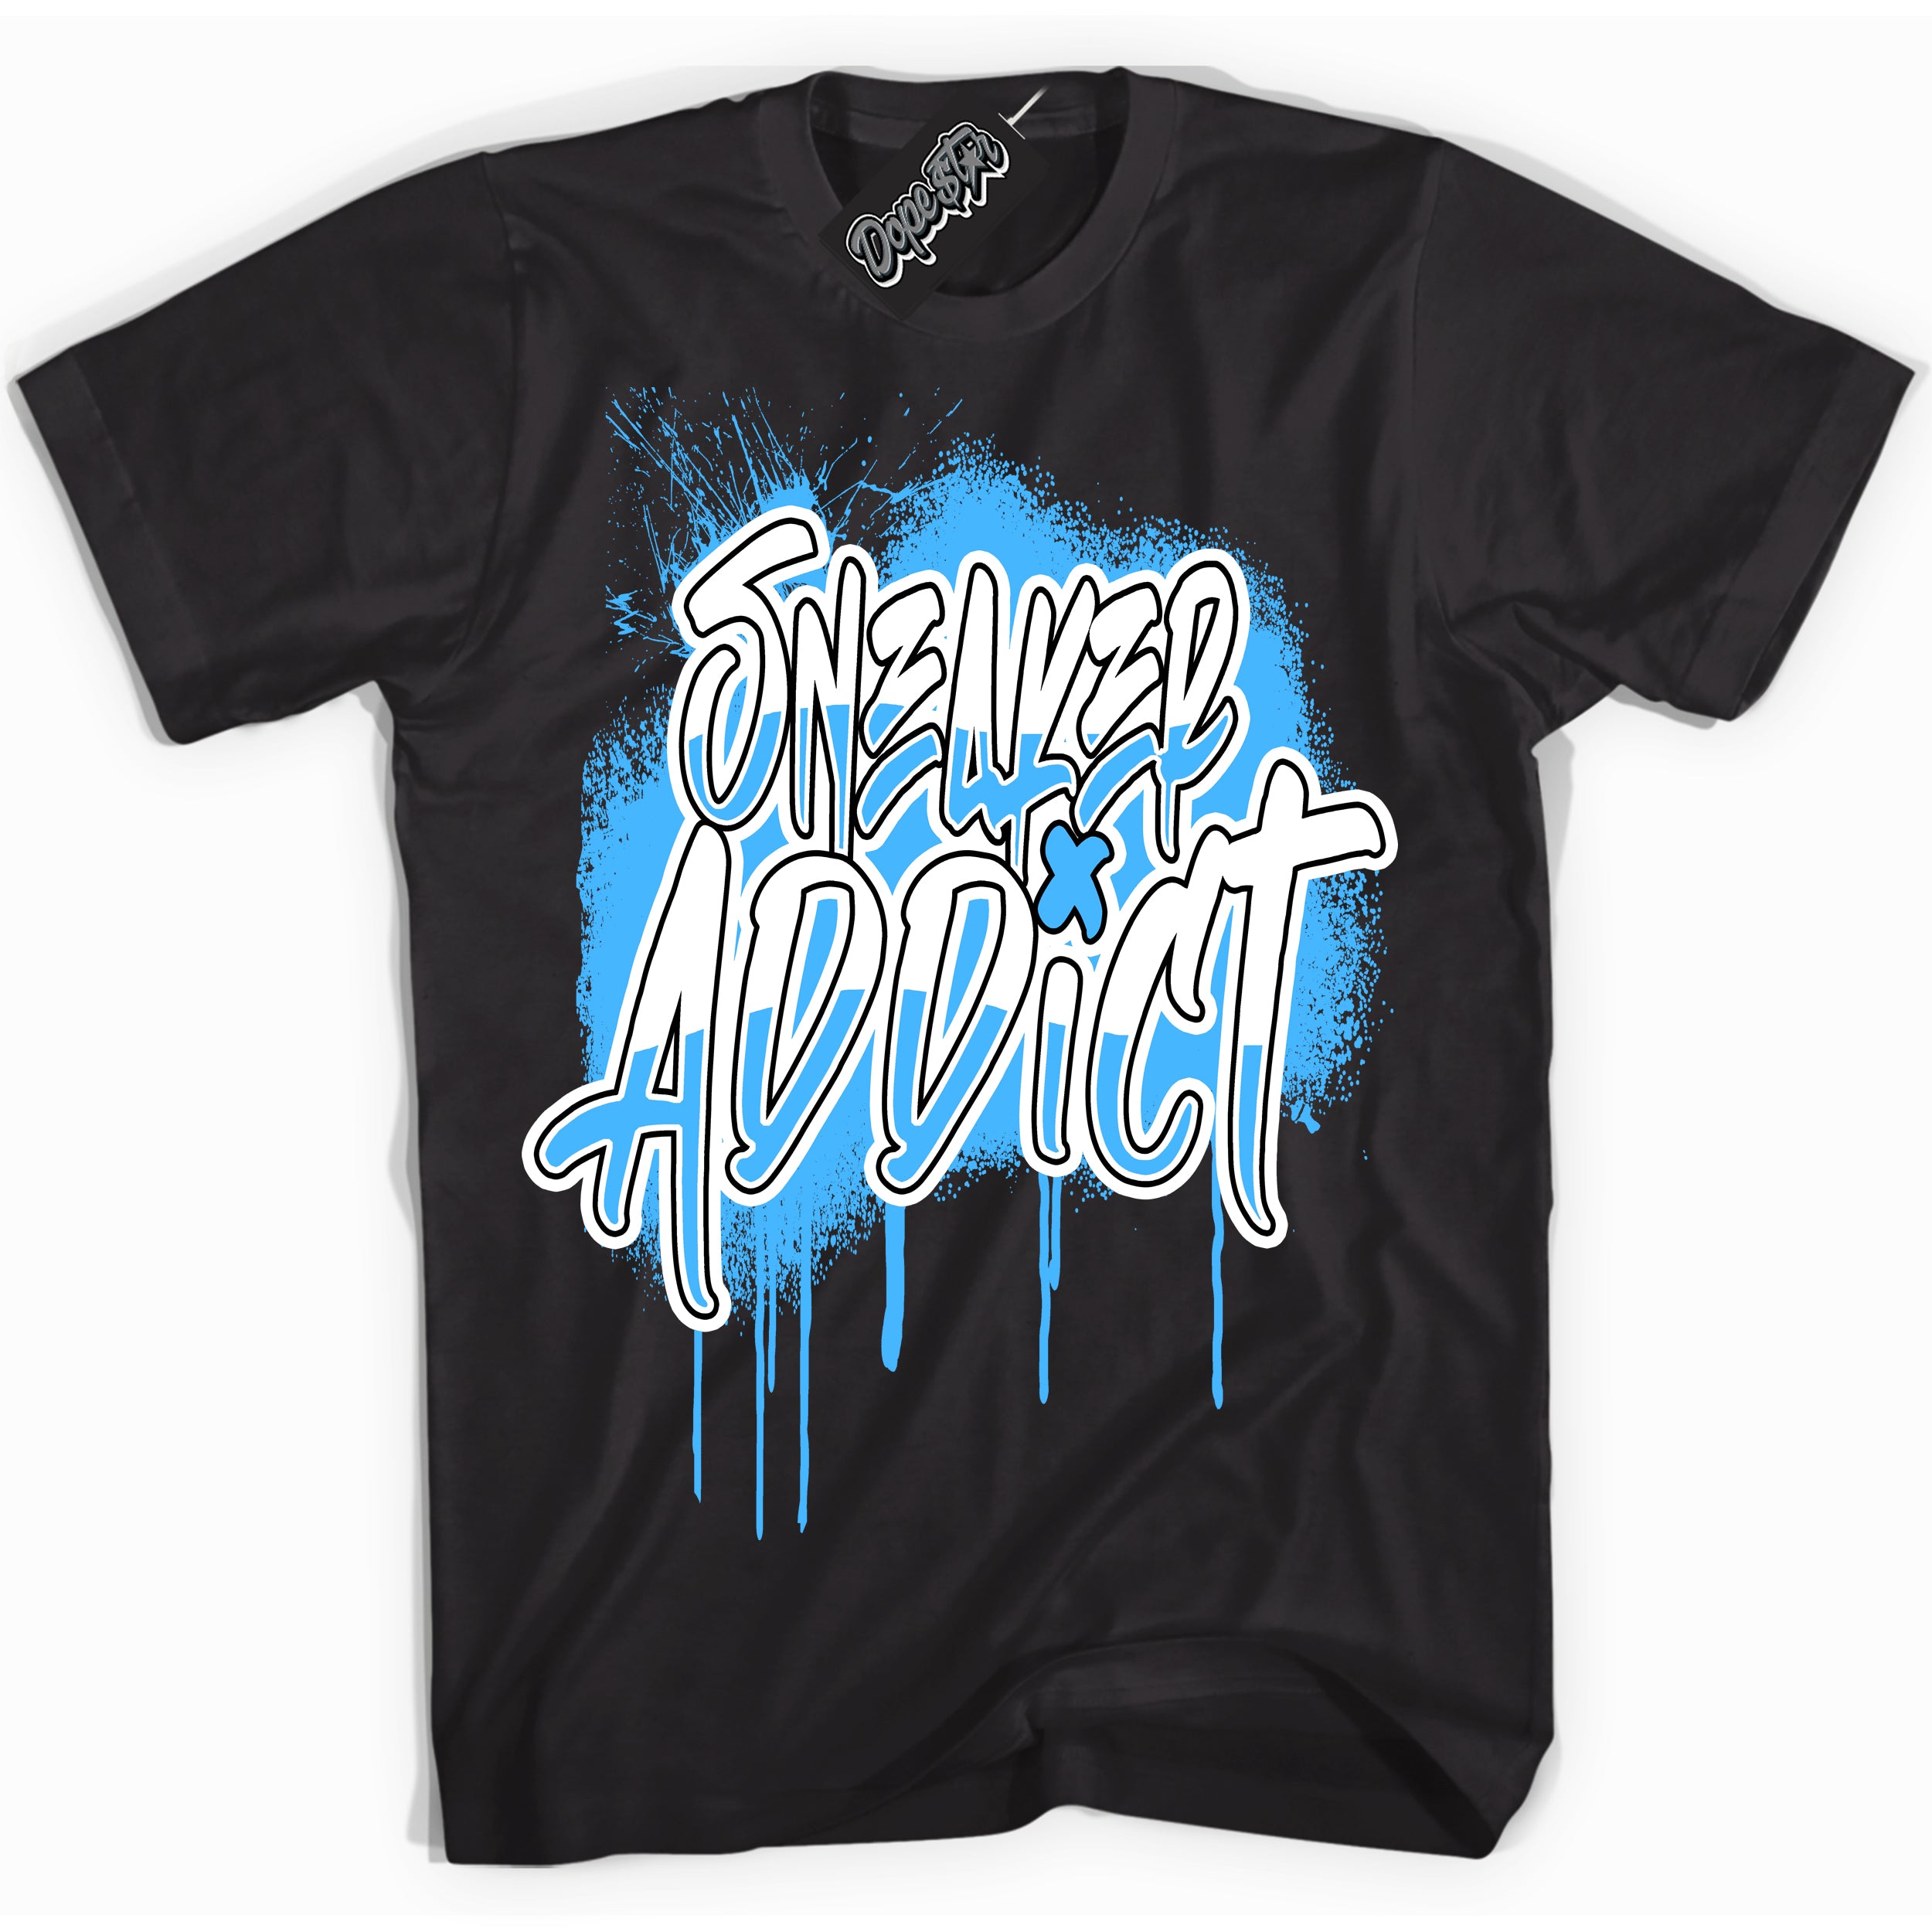 Cool Black graphic tee with “ Sneaker Addict ” design, that perfectly matches Powder Blue 9s sneakers 